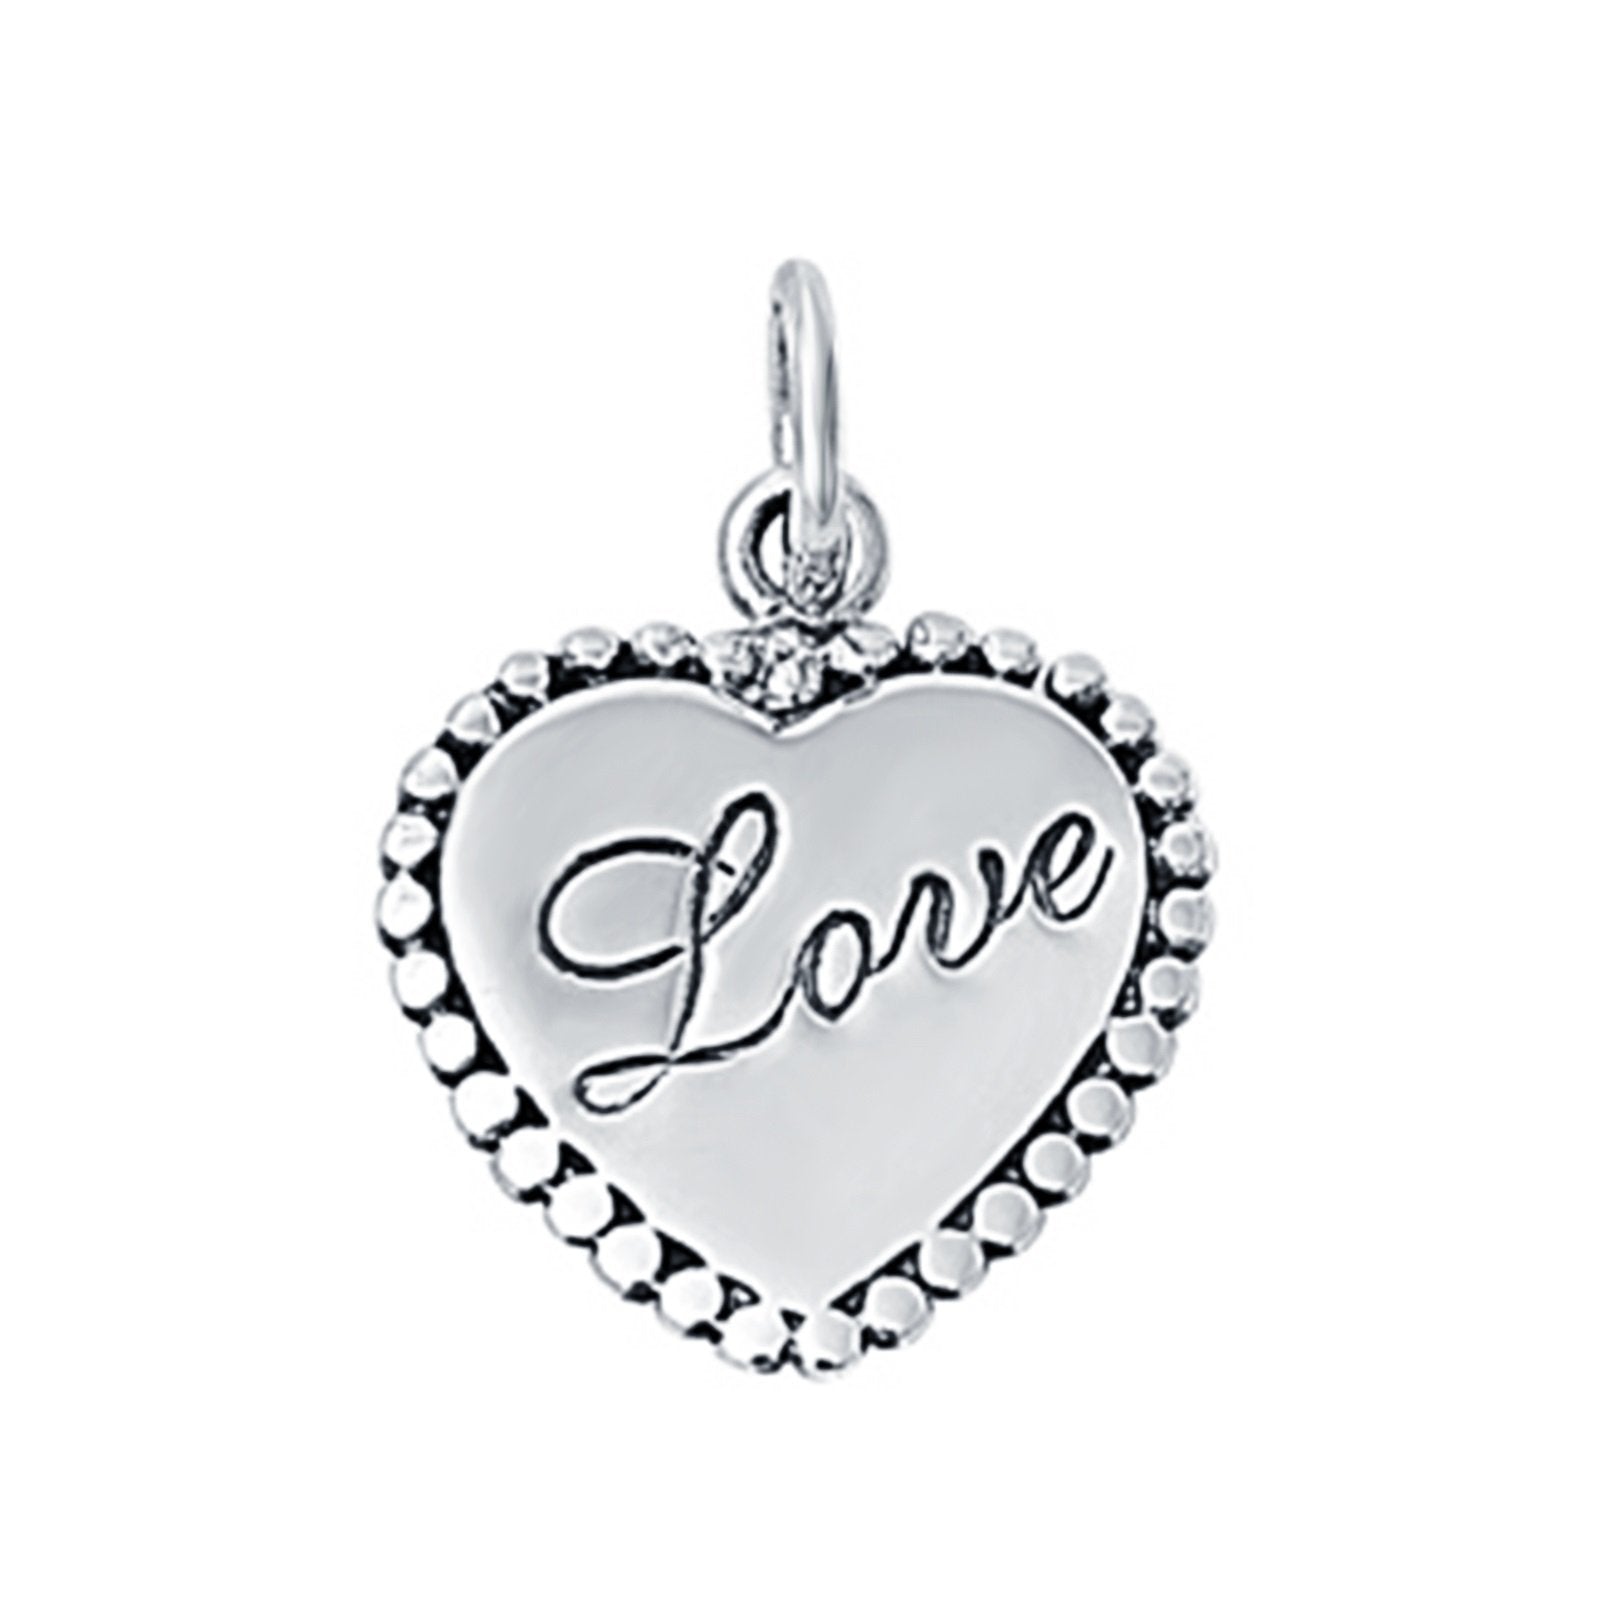 Heart Engraved Love Pendant Charm 925 Sterling Silver